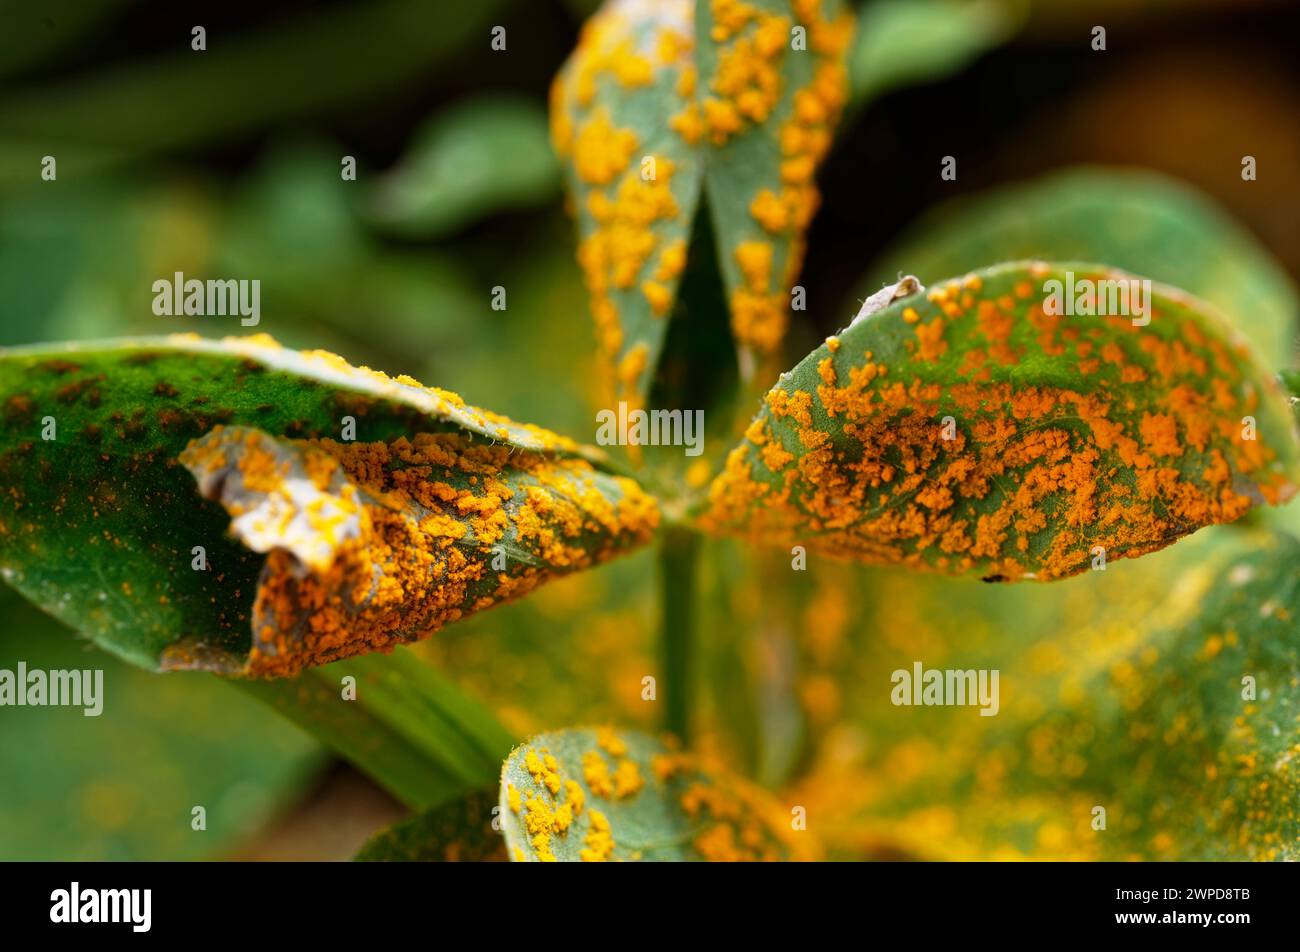 A member of the wood-sorrel family, Oxildaceae, this oxalis shows sign of oxalis rust, a Puccinia fungus. Stock Photo